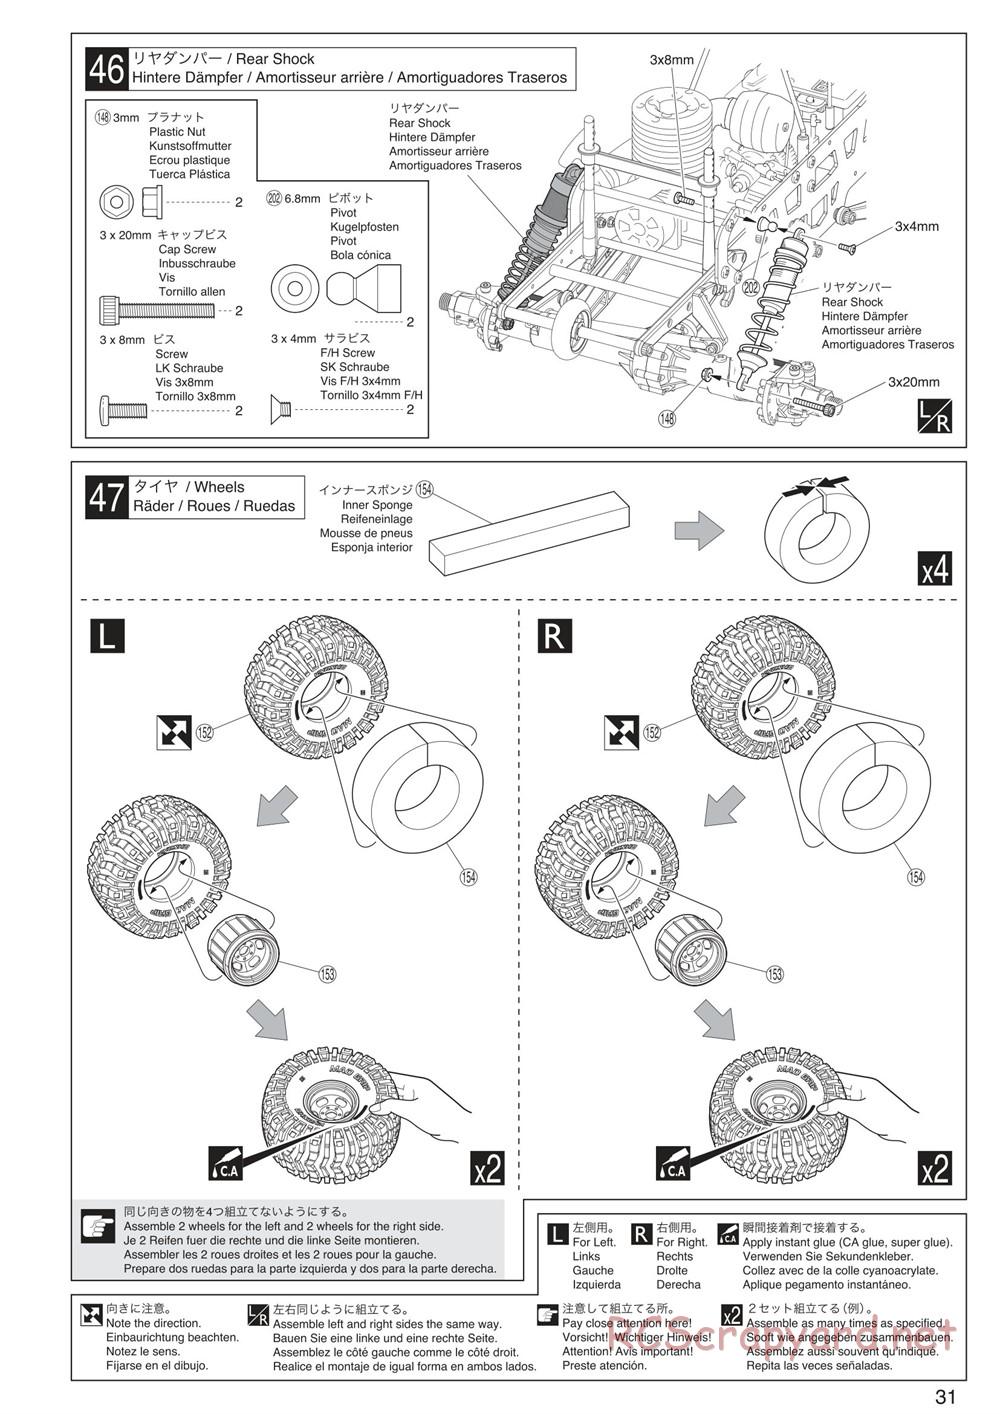 Kyosho - Mad Crusher - Manual - Page 31